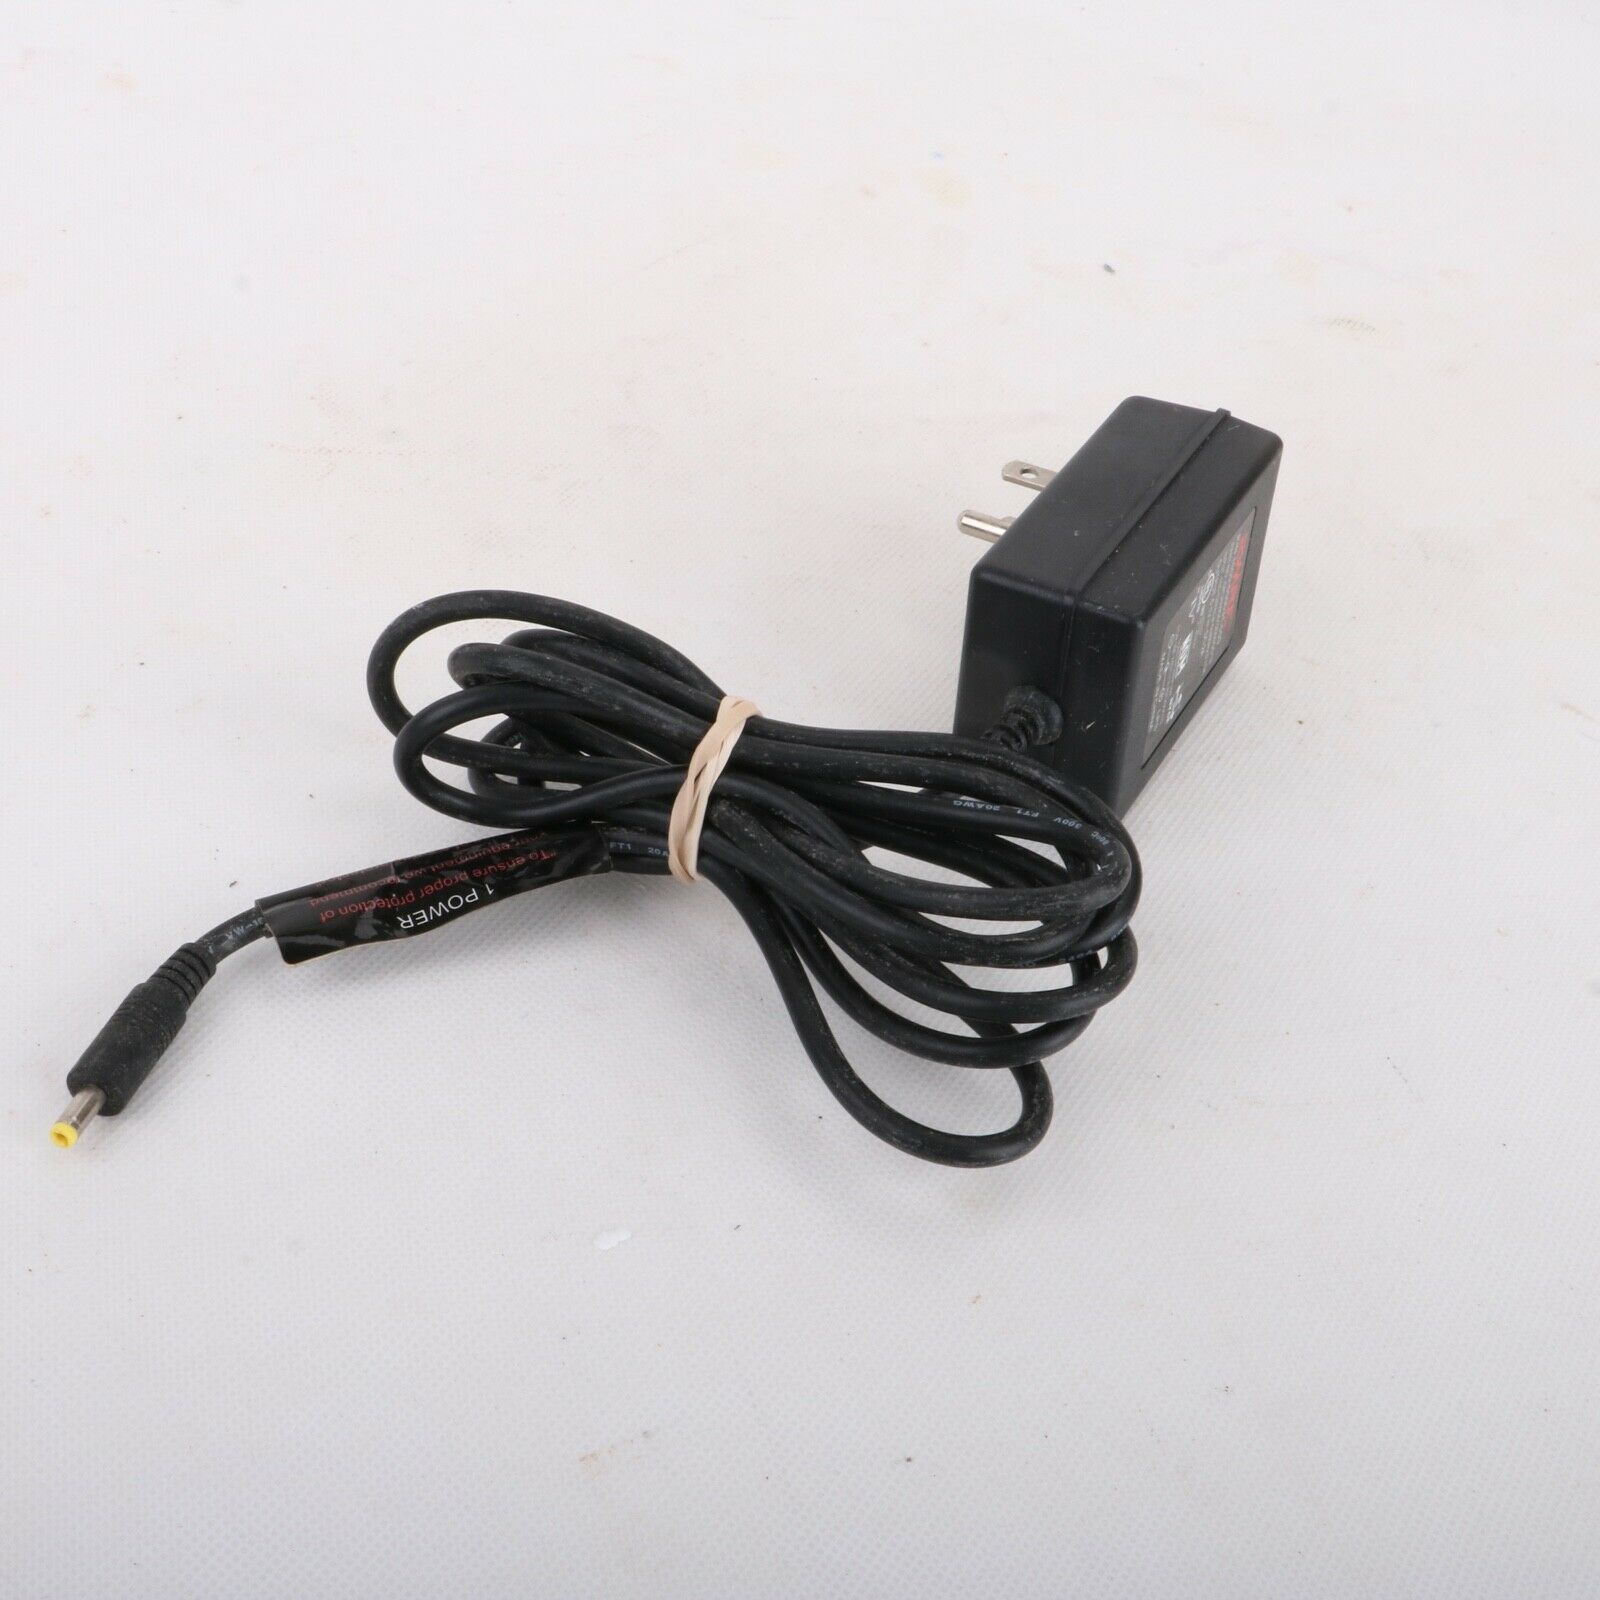 Genuine 2-Wire Modem Power Supply Switching Adapter Plug 5.1V 2A 1000-500031-000 Country/Region of Manufacture: Chin